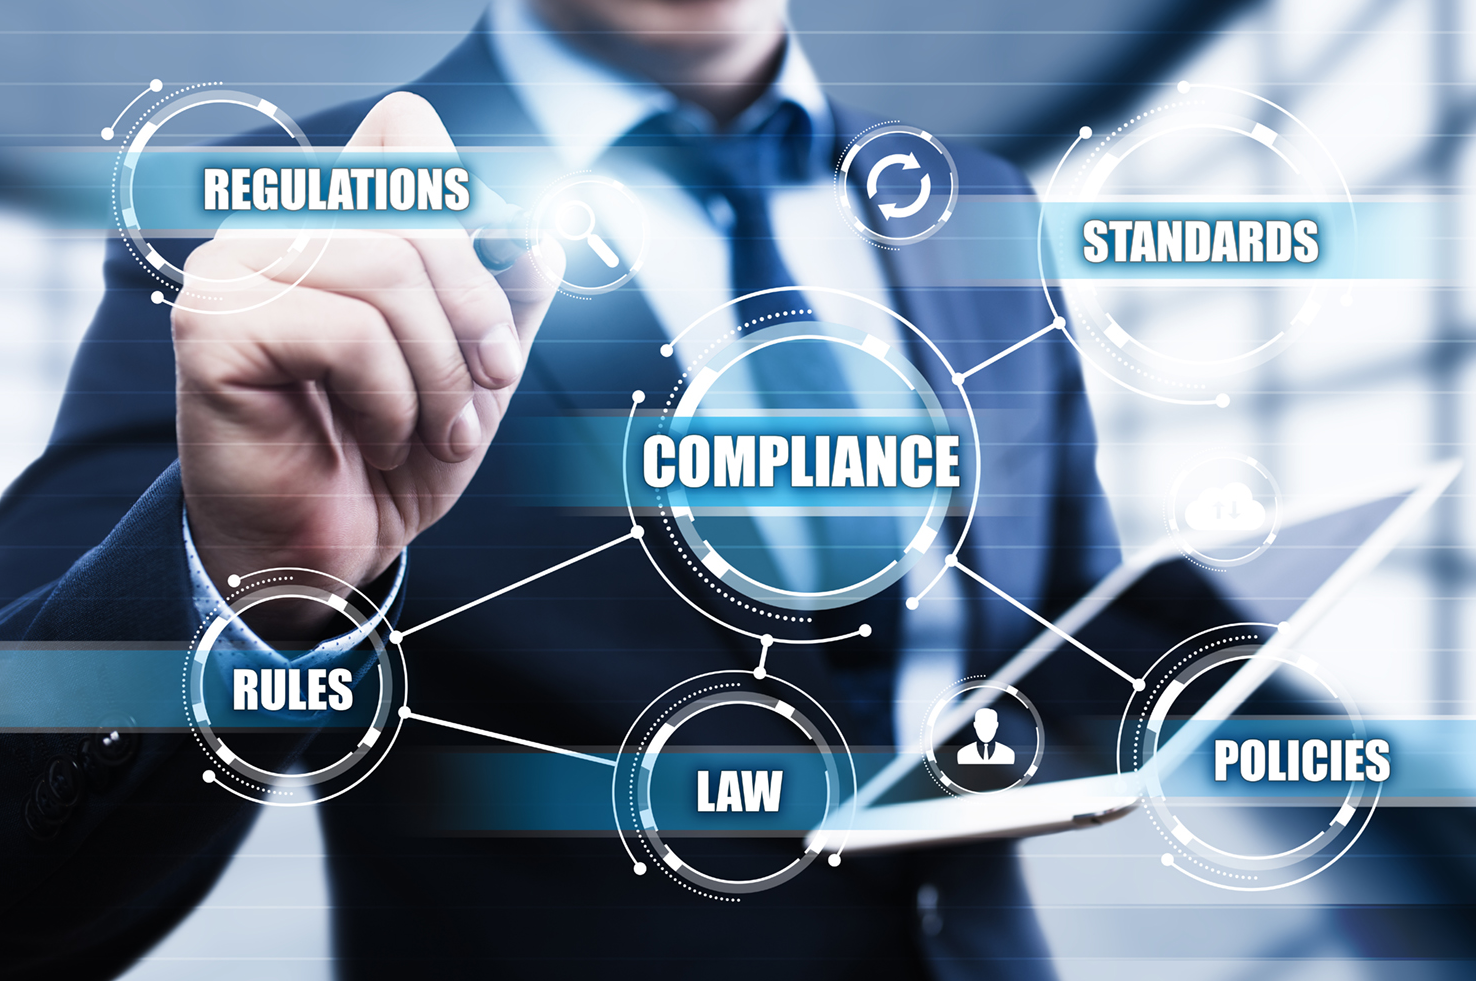 ICT60220 (ADIT) Term 4 | ICTCYS606 - Evaluate an organisation’s compliance with cyber security standards and law